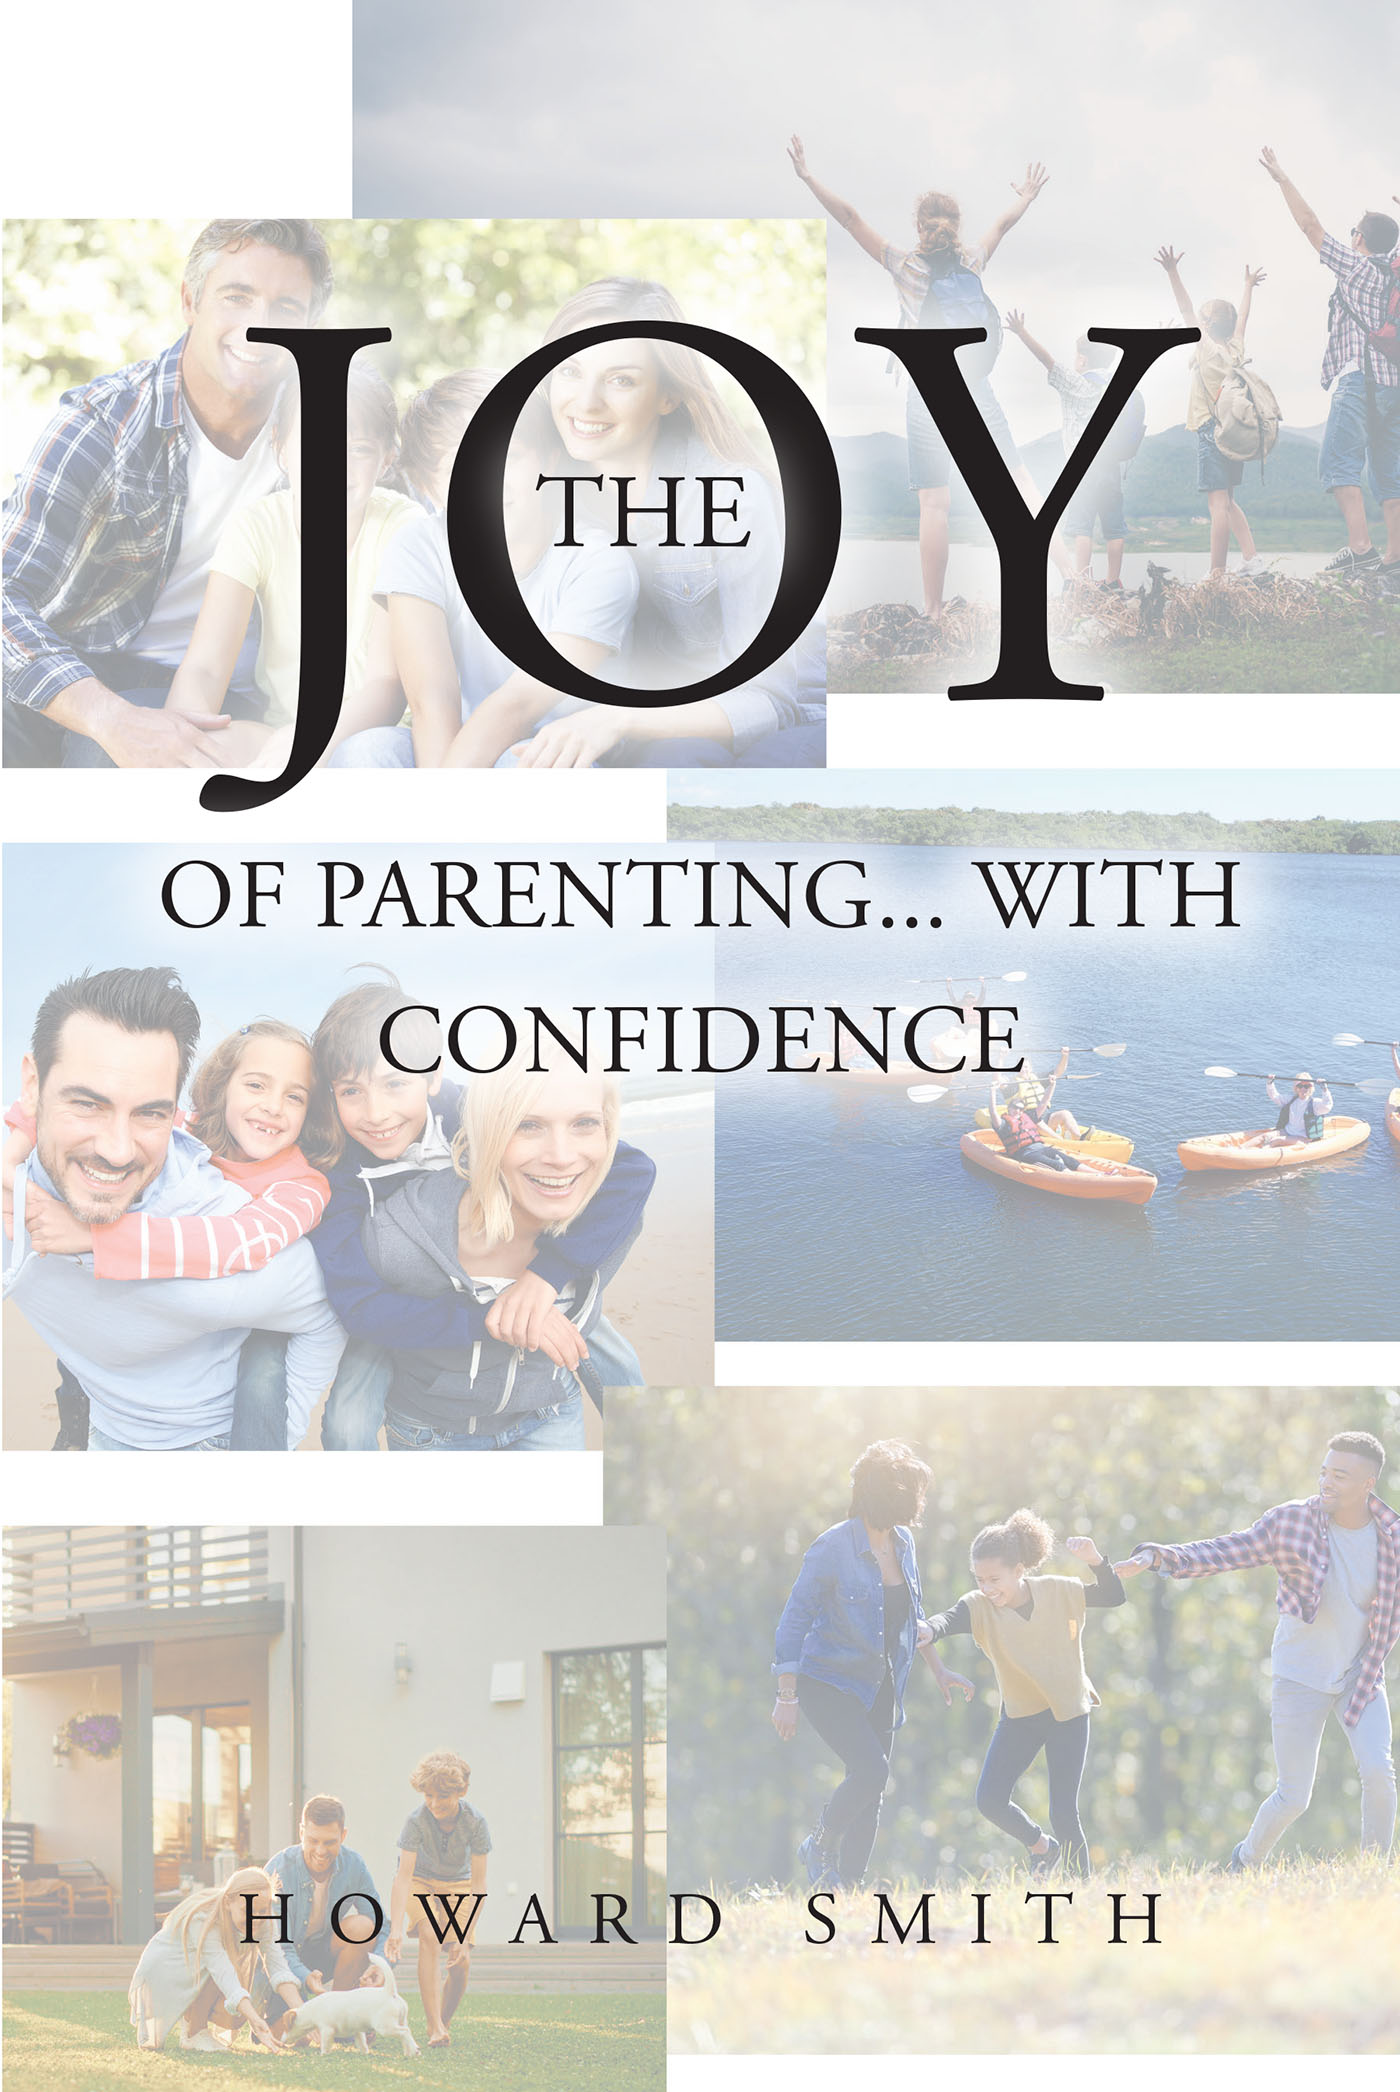 Howard H. Smith’s Newly Released "The Joy of Parenting... With Confidence" is a Biblically-Based Approach to Raising Productive, Godly Members of Society